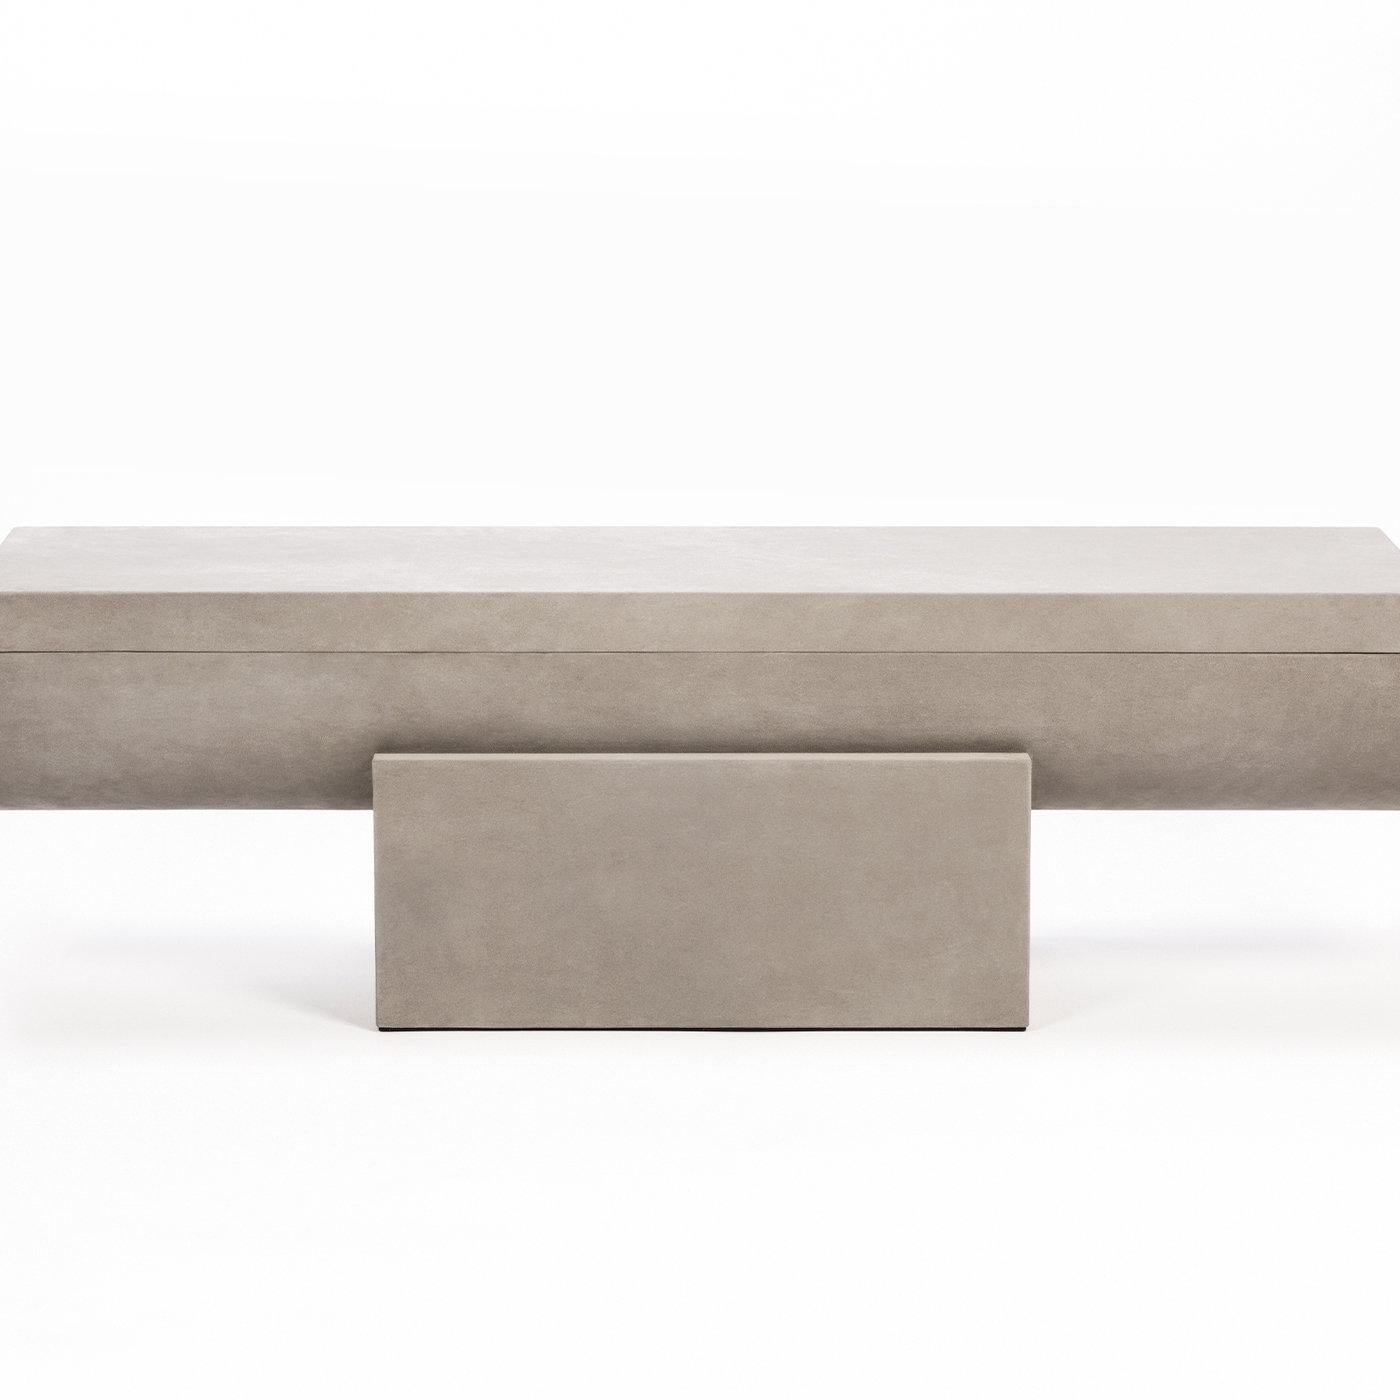 Contemporary leather bench - Aurelia by Stephane Parmentier for Giobagnara.
The object presented in the image has following finish: A37 light grey suede leather.

Classic yet modern at the same time, this statement-making bench is part of the